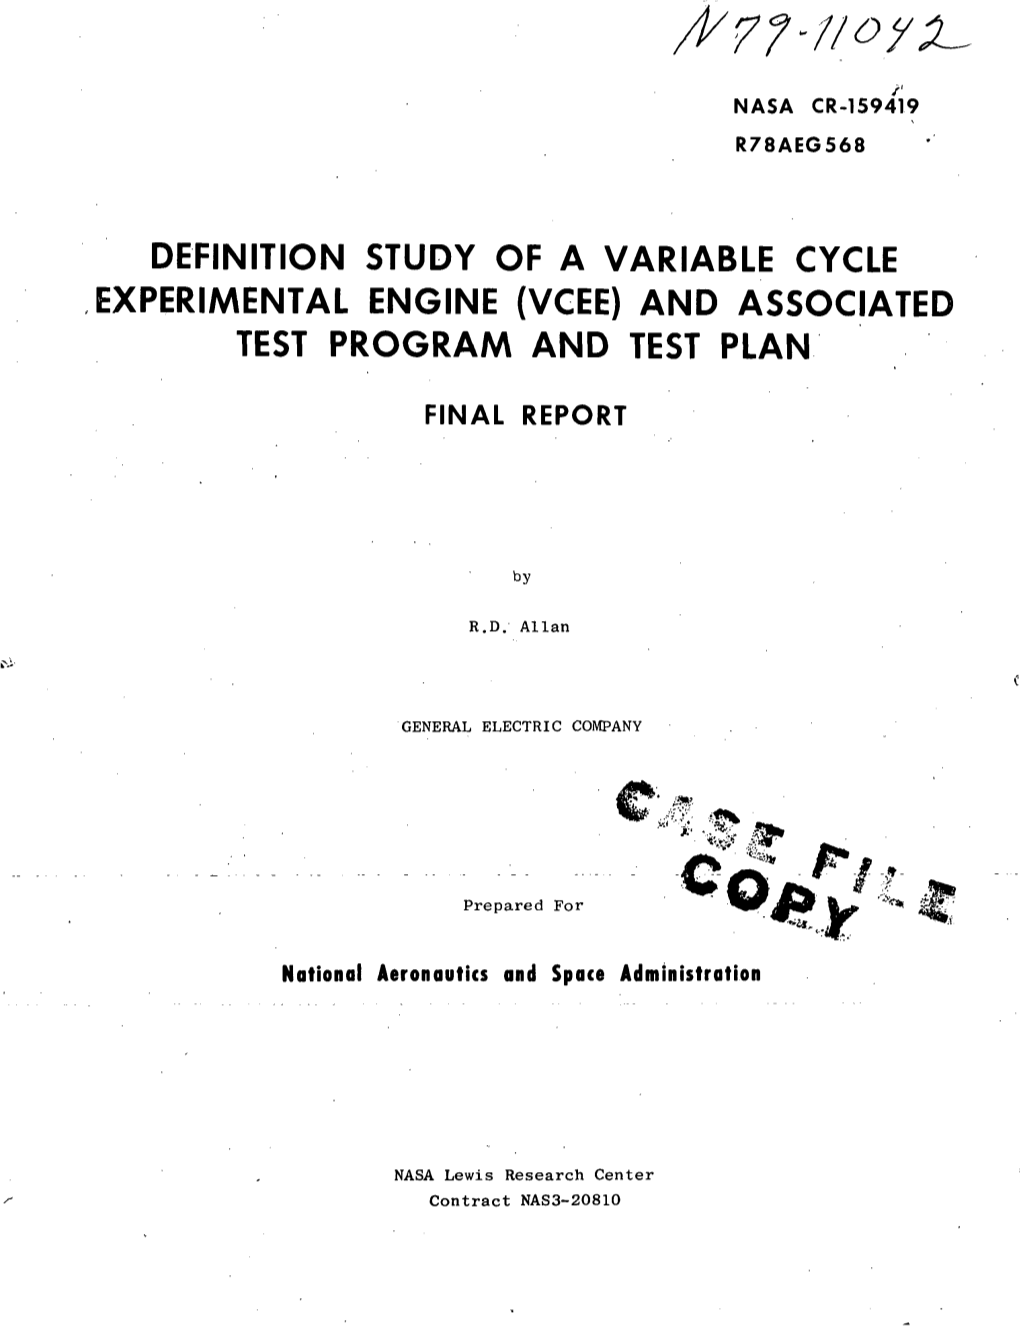 Definition Study of a Variable Cycle Experimental Engine (Vcee) and Associated Test Program and Test Plan